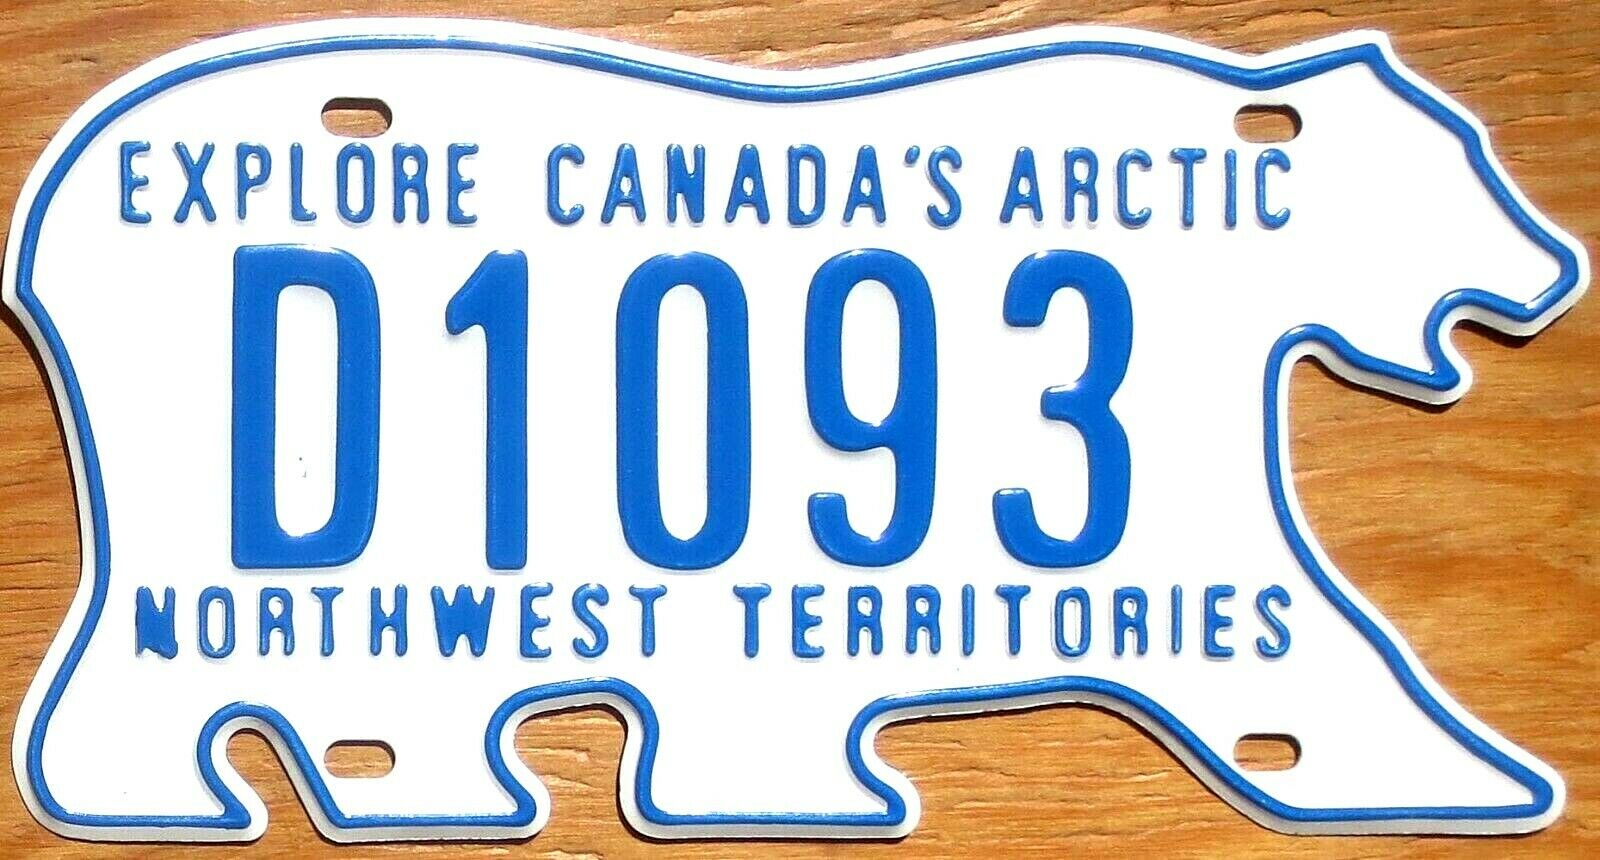 Northwest Territories Nwt License Plate Number Tag - Bear